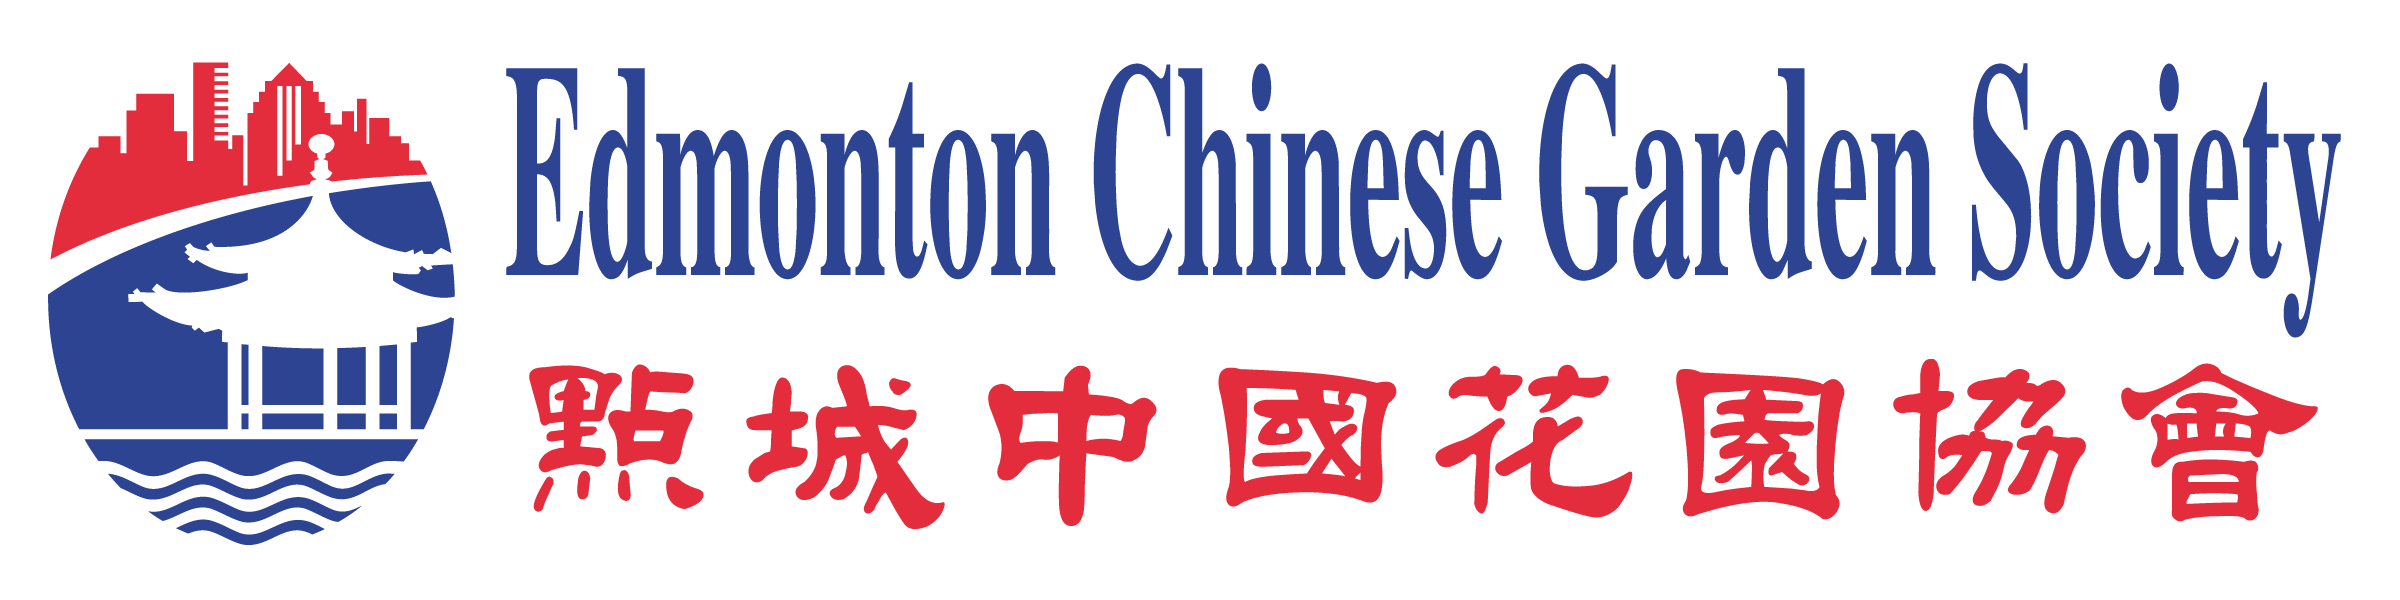 Logo-EDM_Chinese_Garden_Fixed1.png